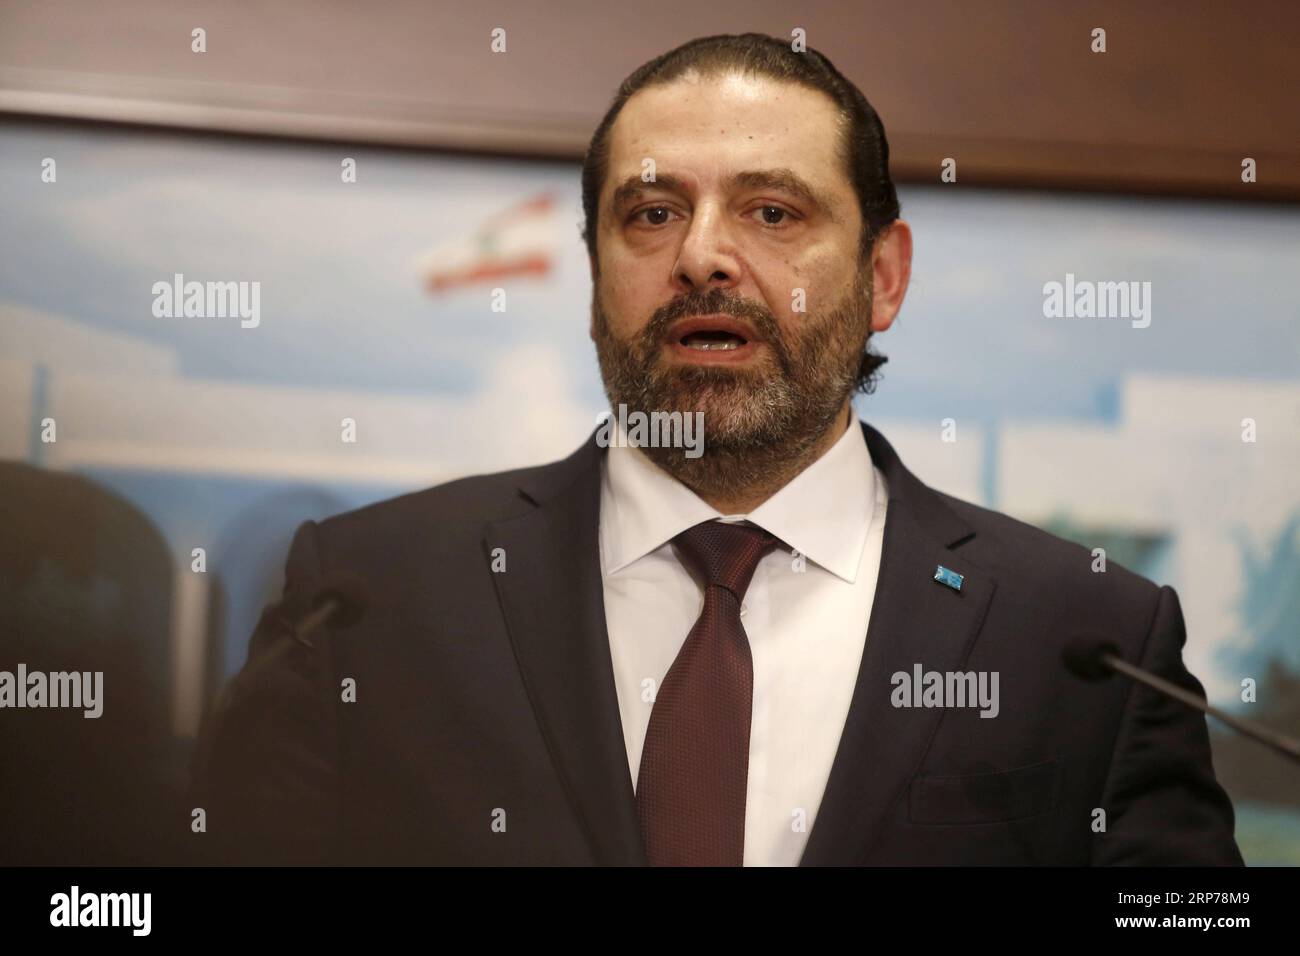 (190131) -- BEIRUT, Jan. 31, 2019 -- Lebanese Prime Minister Saad Hariri speaks at a press conference in Beirut, Lebanon, Jan. 31, 2019. Lebanon announced Thursday the formation of a new government, which is headed by Prime Minister Saad Hariri, breaking a nine-month political deadlock in the country, local TV Channel LBCI reported. ) LEBANON-BEIRUT-PM-NEW GOVERNMENT BilalxJawich PUBLICATIONxNOTxINxCHN Stock Photo